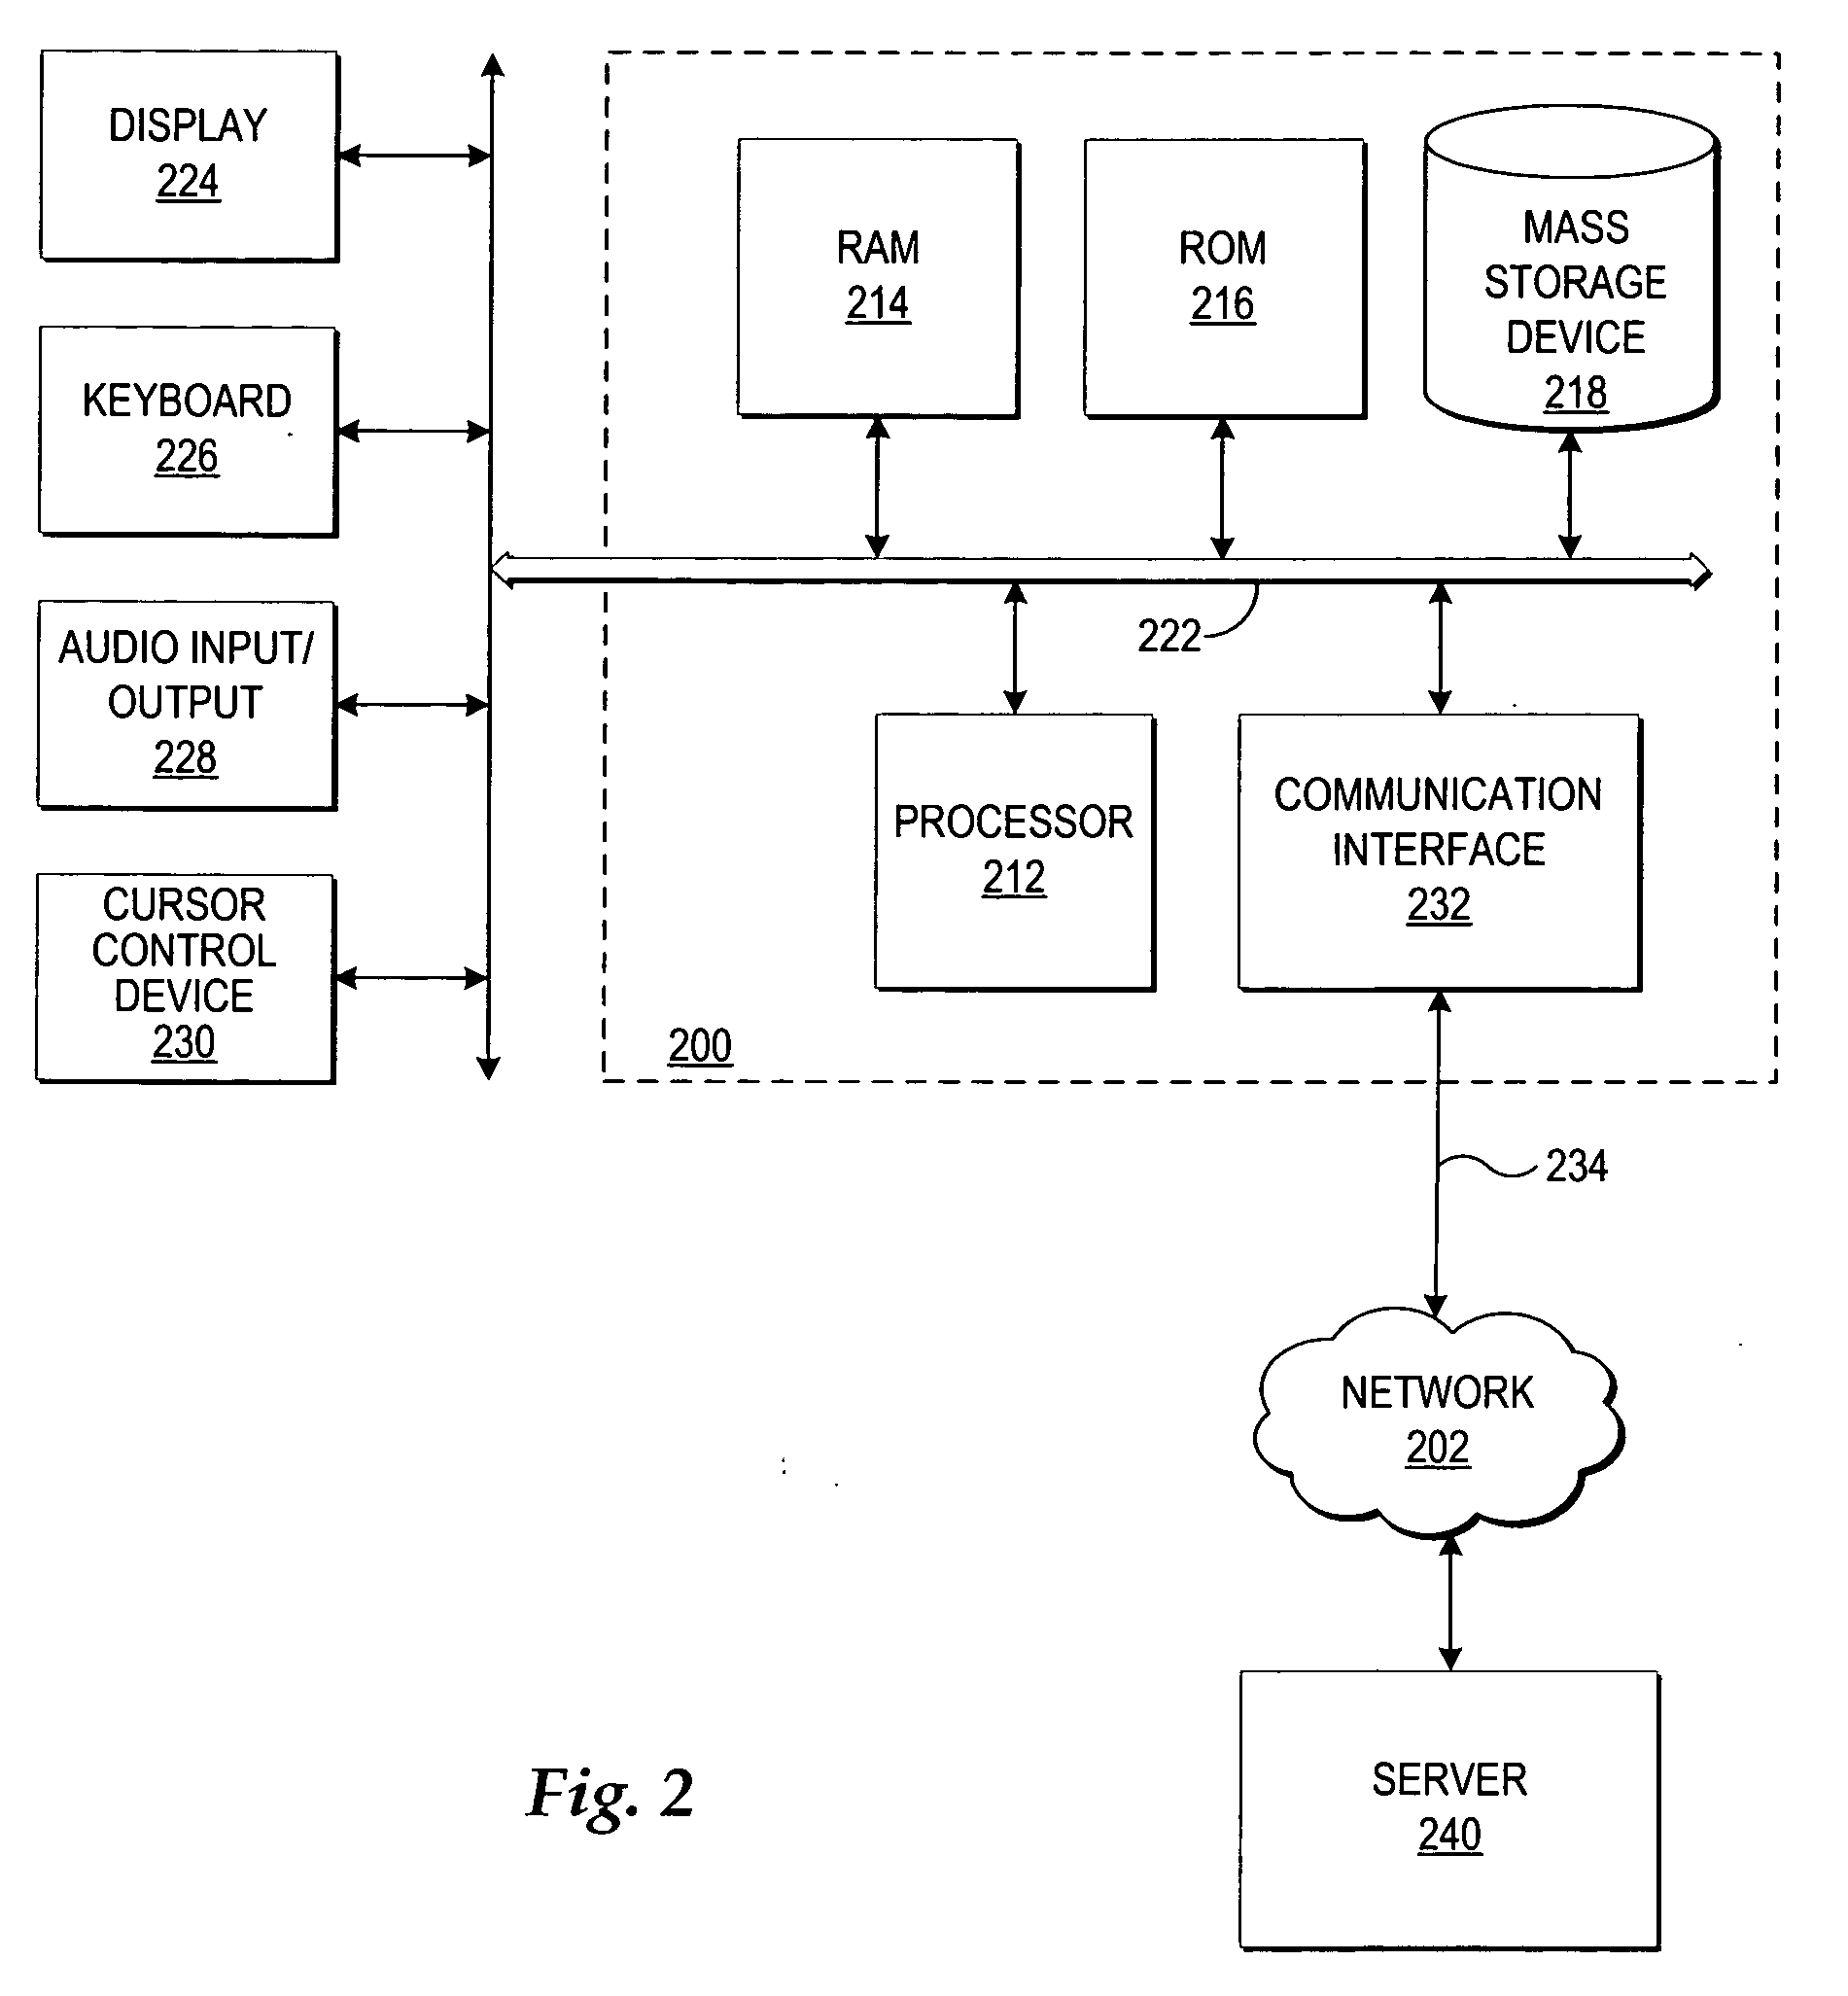 Security screening of electronic devices by device-reported data